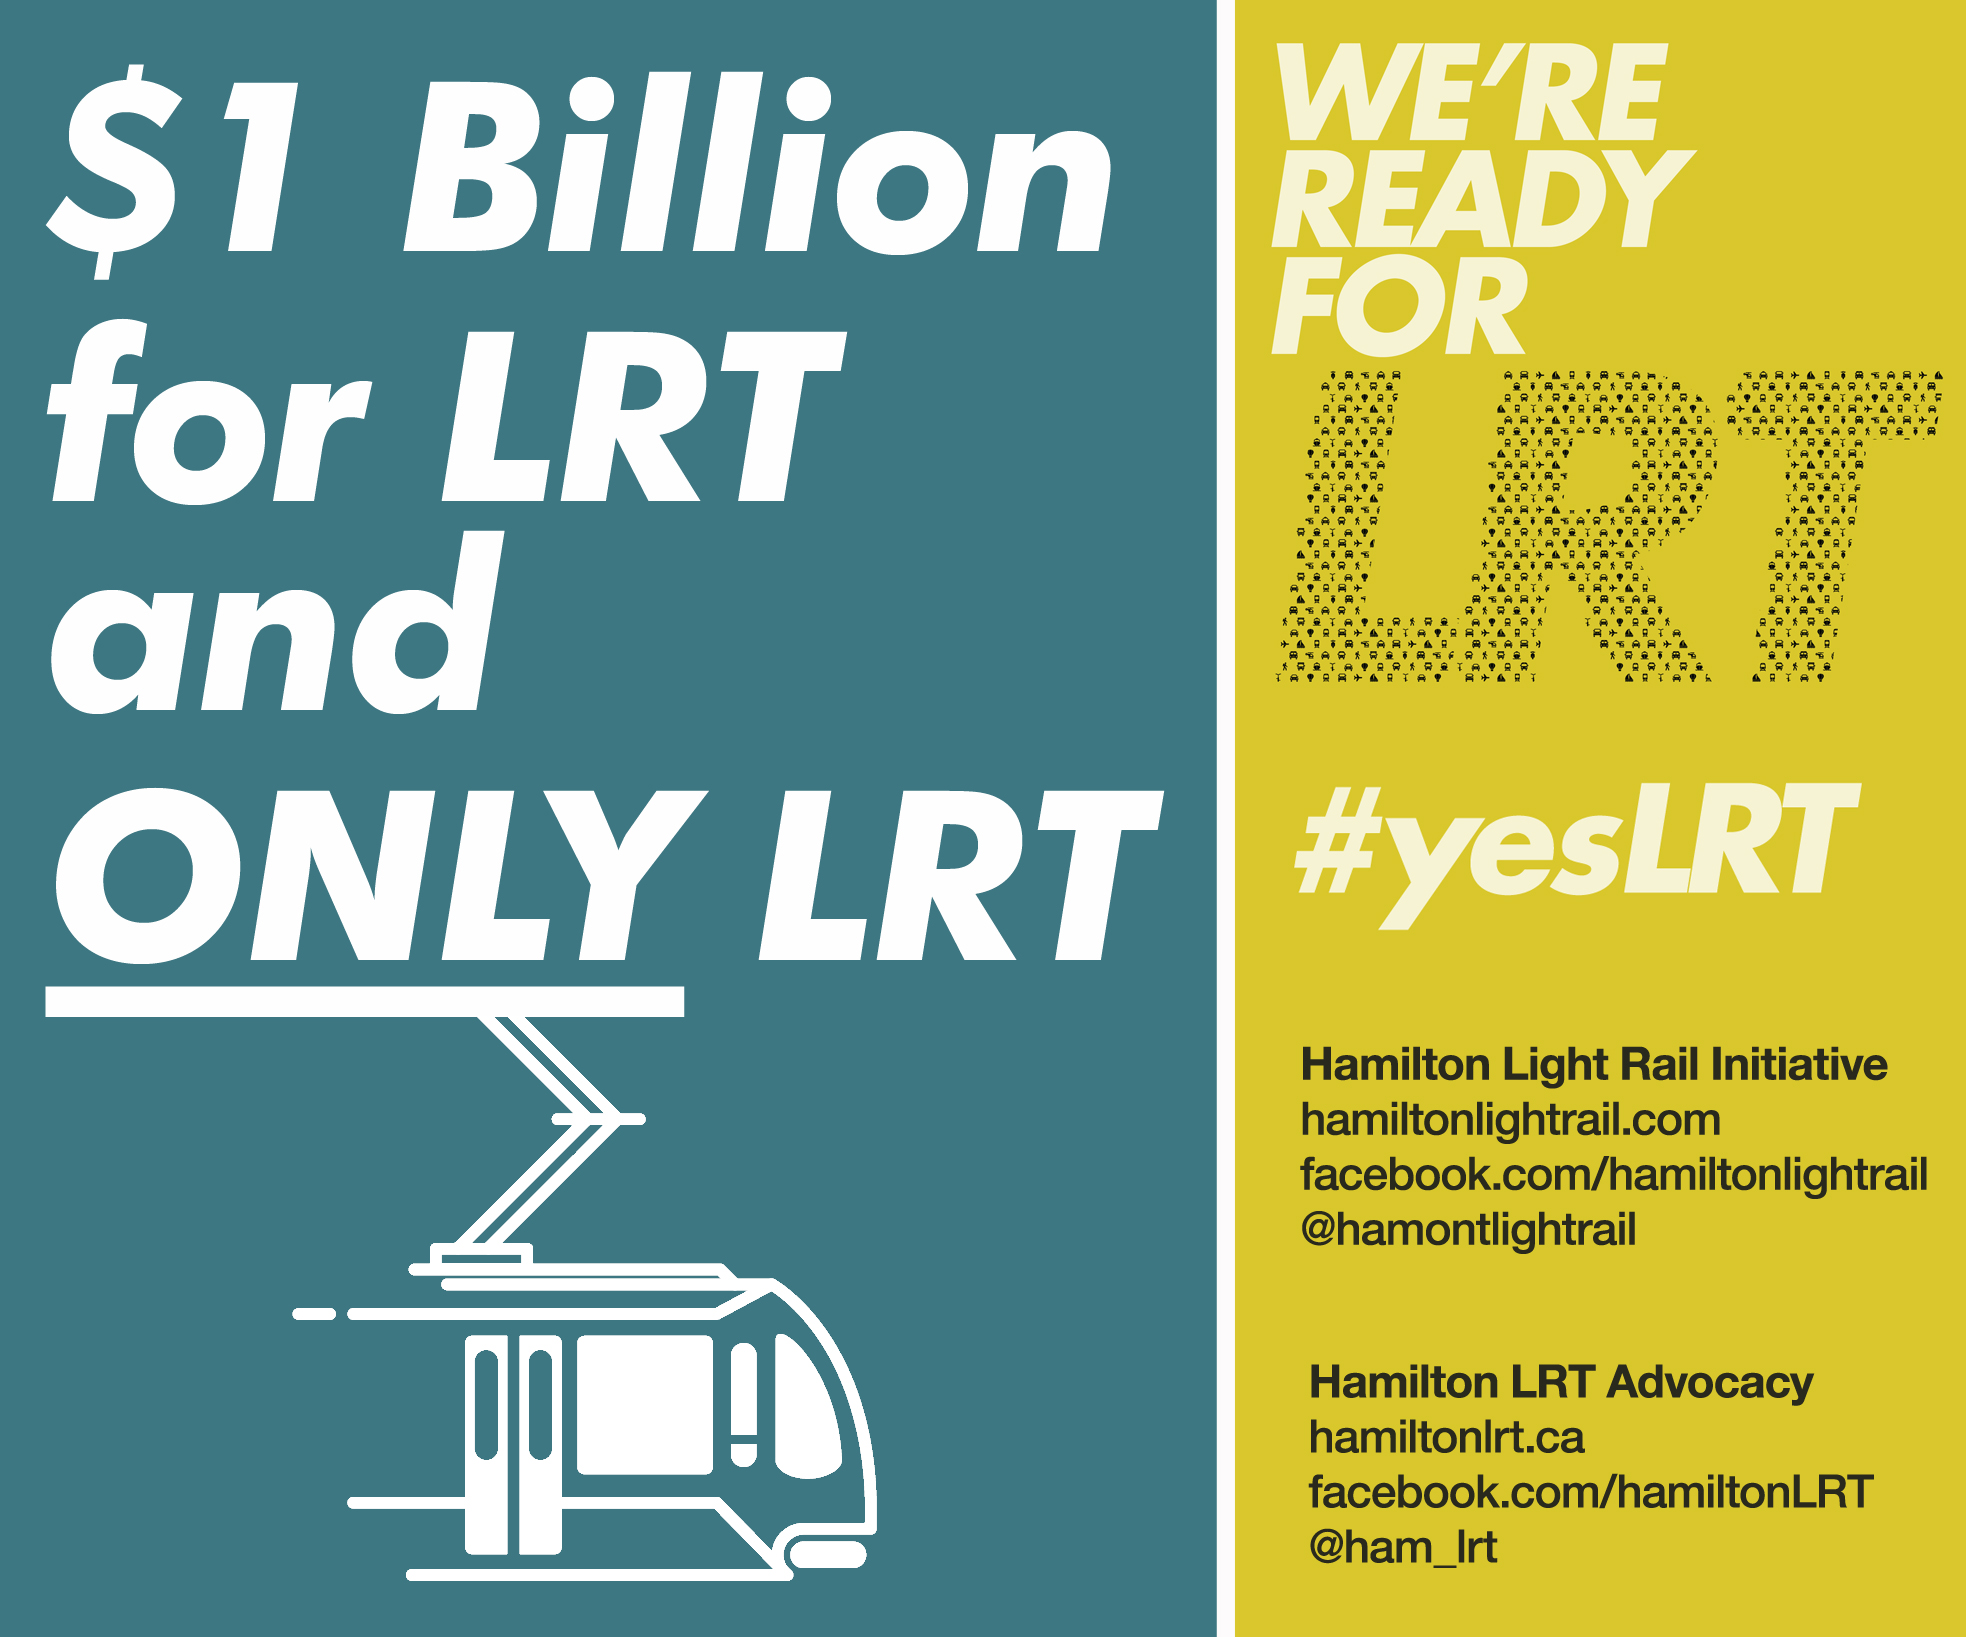 The approved $1 billion LRT budget can only be used for LRT.